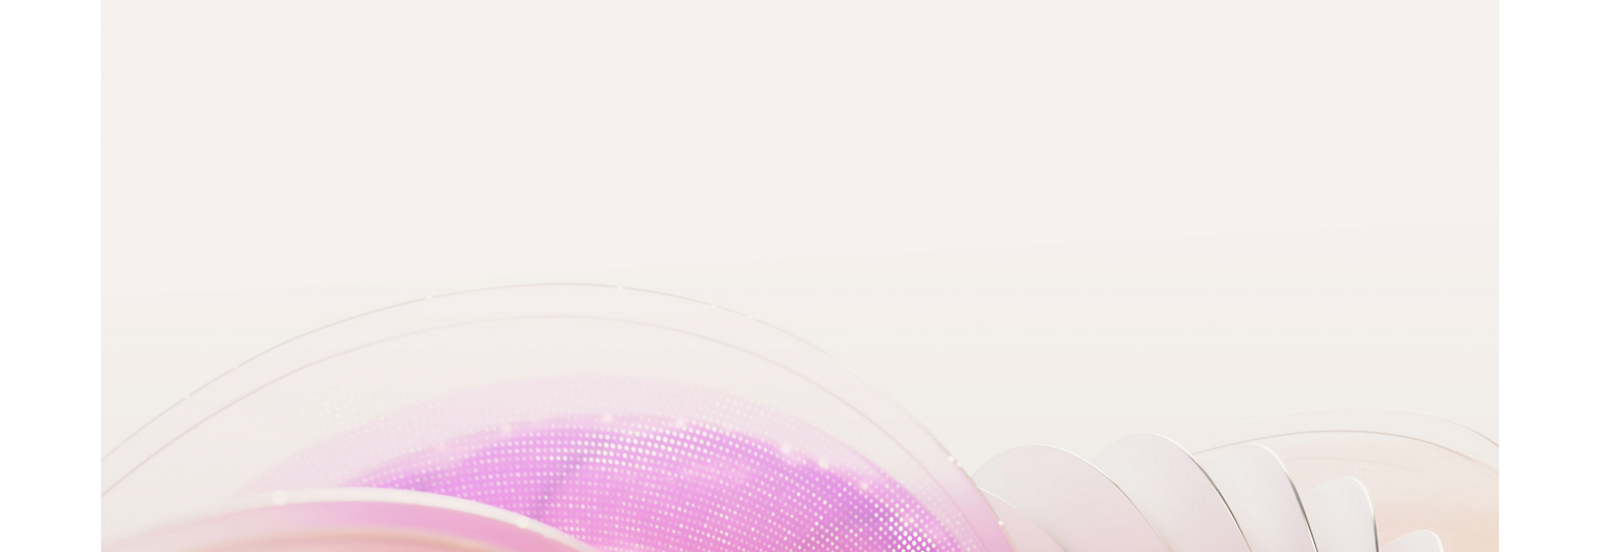 Abstract pastel background with soft pink curves and a glowing purple mesh pattern on the left side.